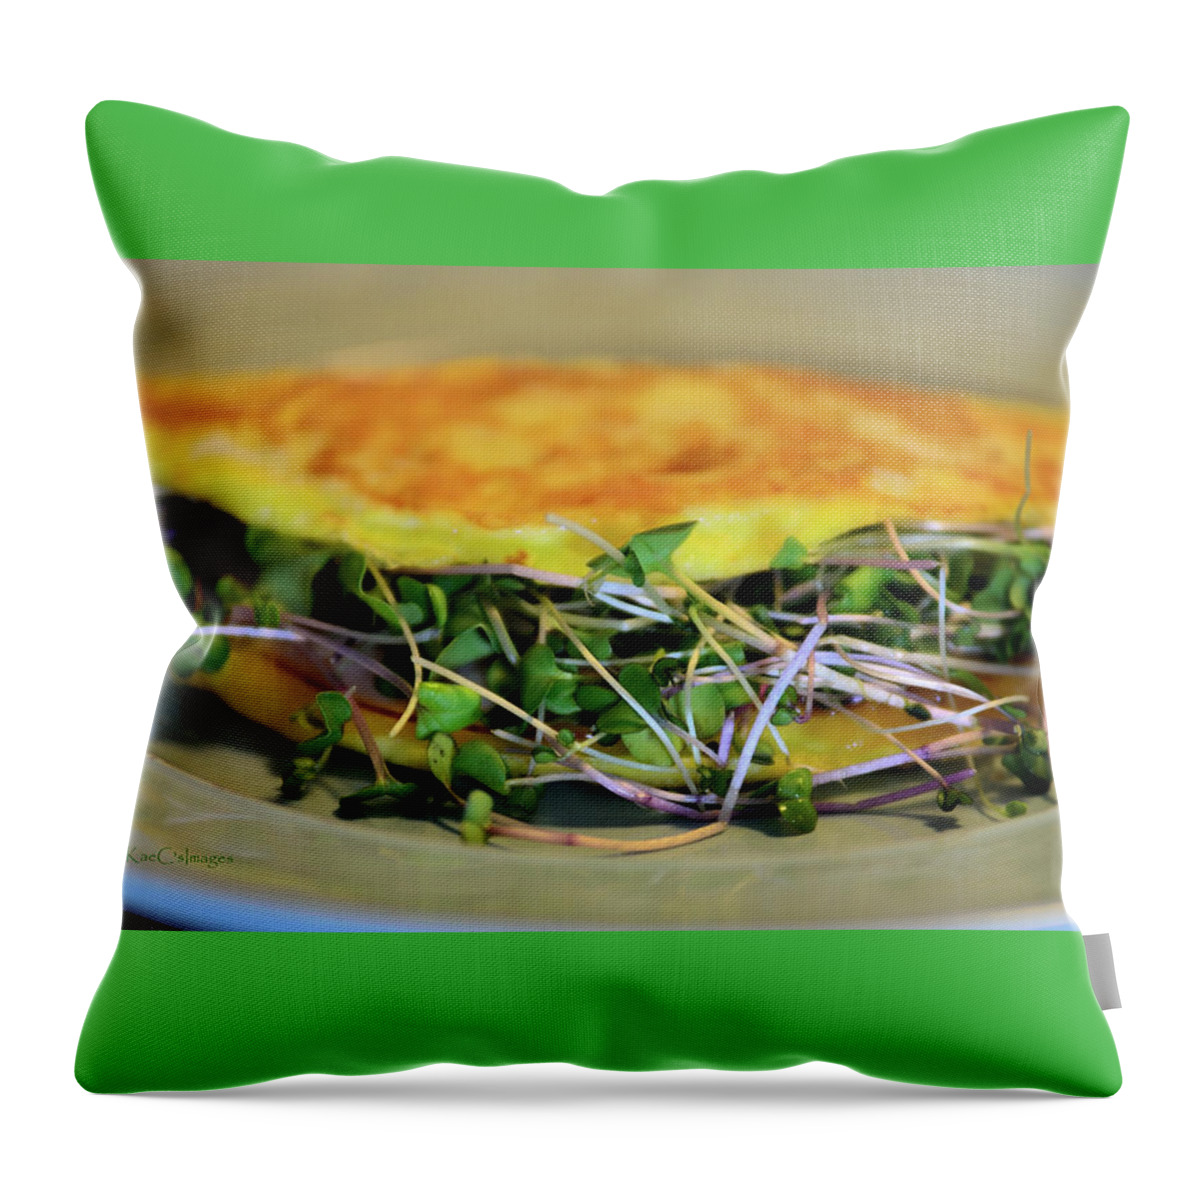 Food Throw Pillow featuring the photograph Omelette With Sprouts by Kae Cheatham